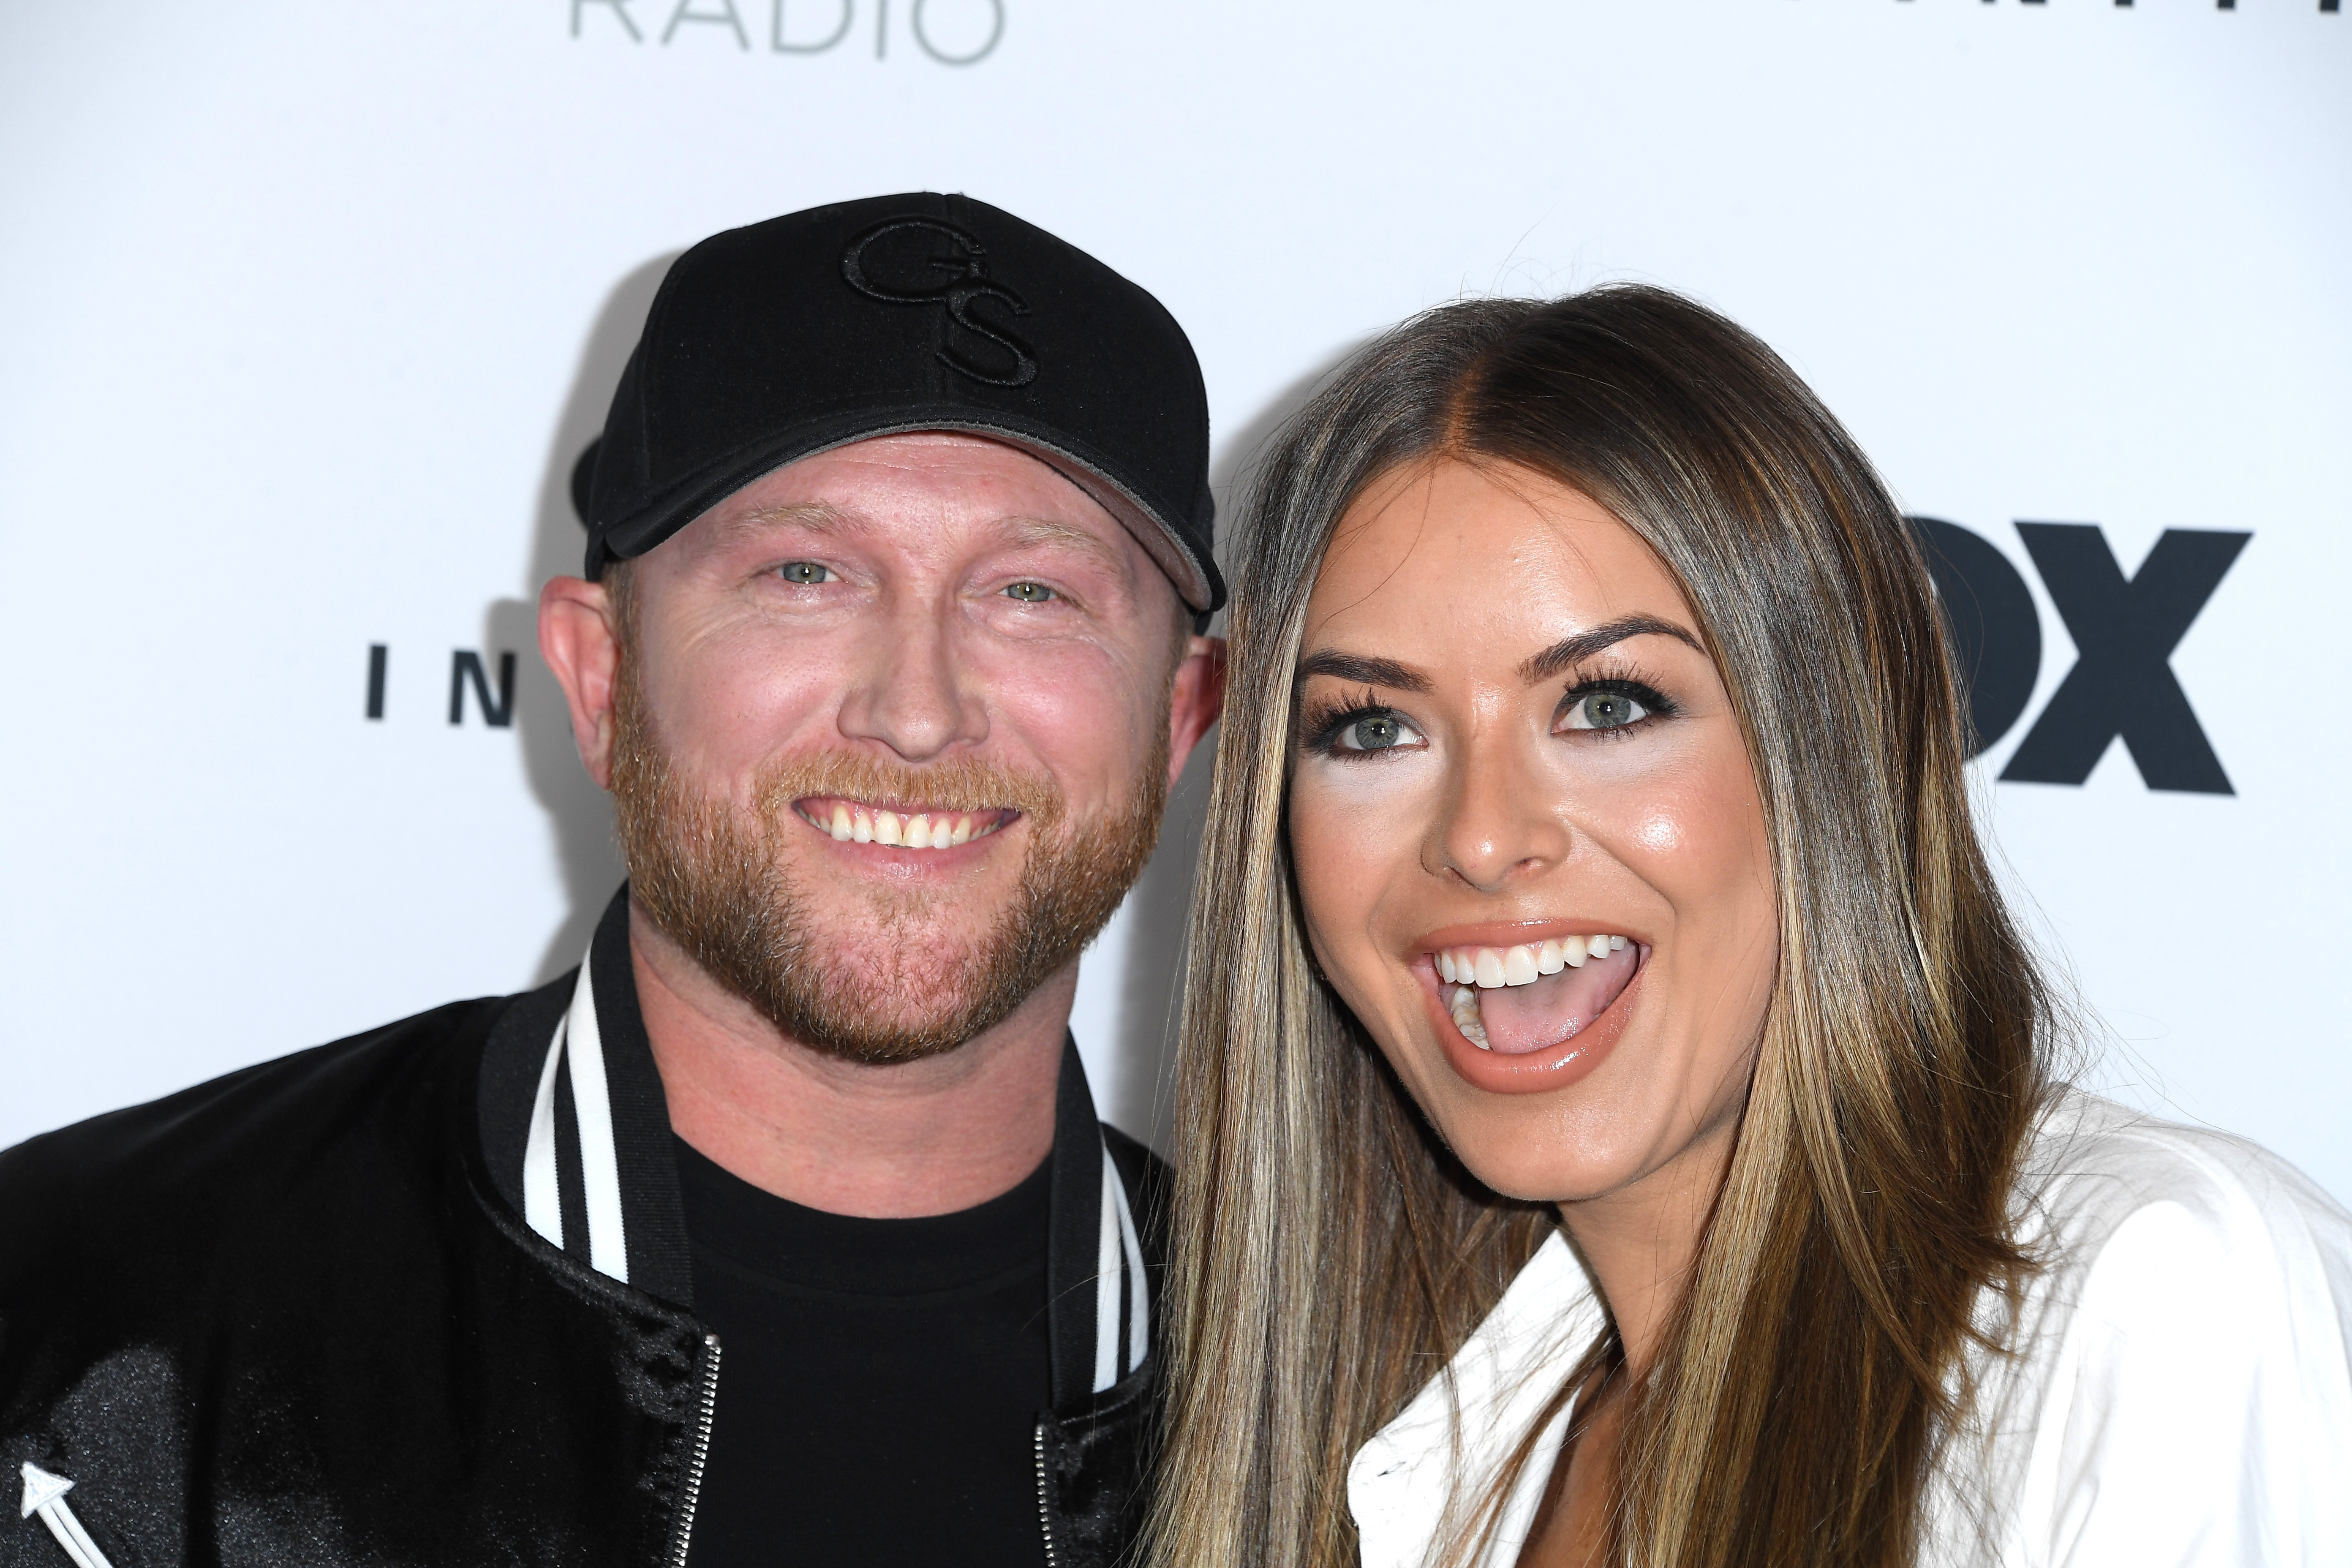 Cole Swindell and Courtney Little at the 2023 iHeartRadio Music Awards - Press Room at Dolby Theatre, on March 27, 2023, in Hollywood, California | Source: Getty Images